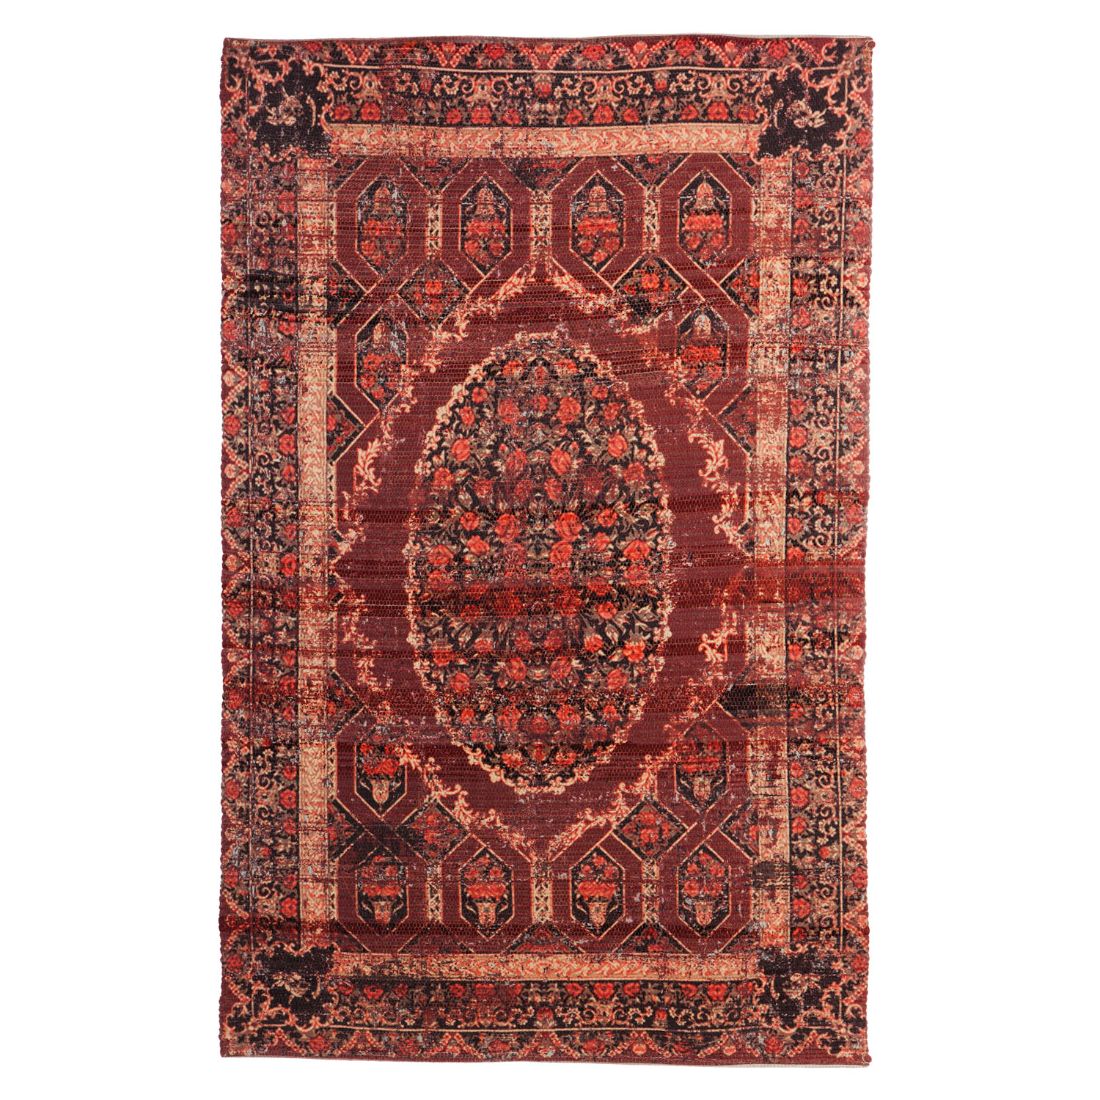 Brown with Red Digitally-Printed Indoor/Outdoor Rug, 4'x6'